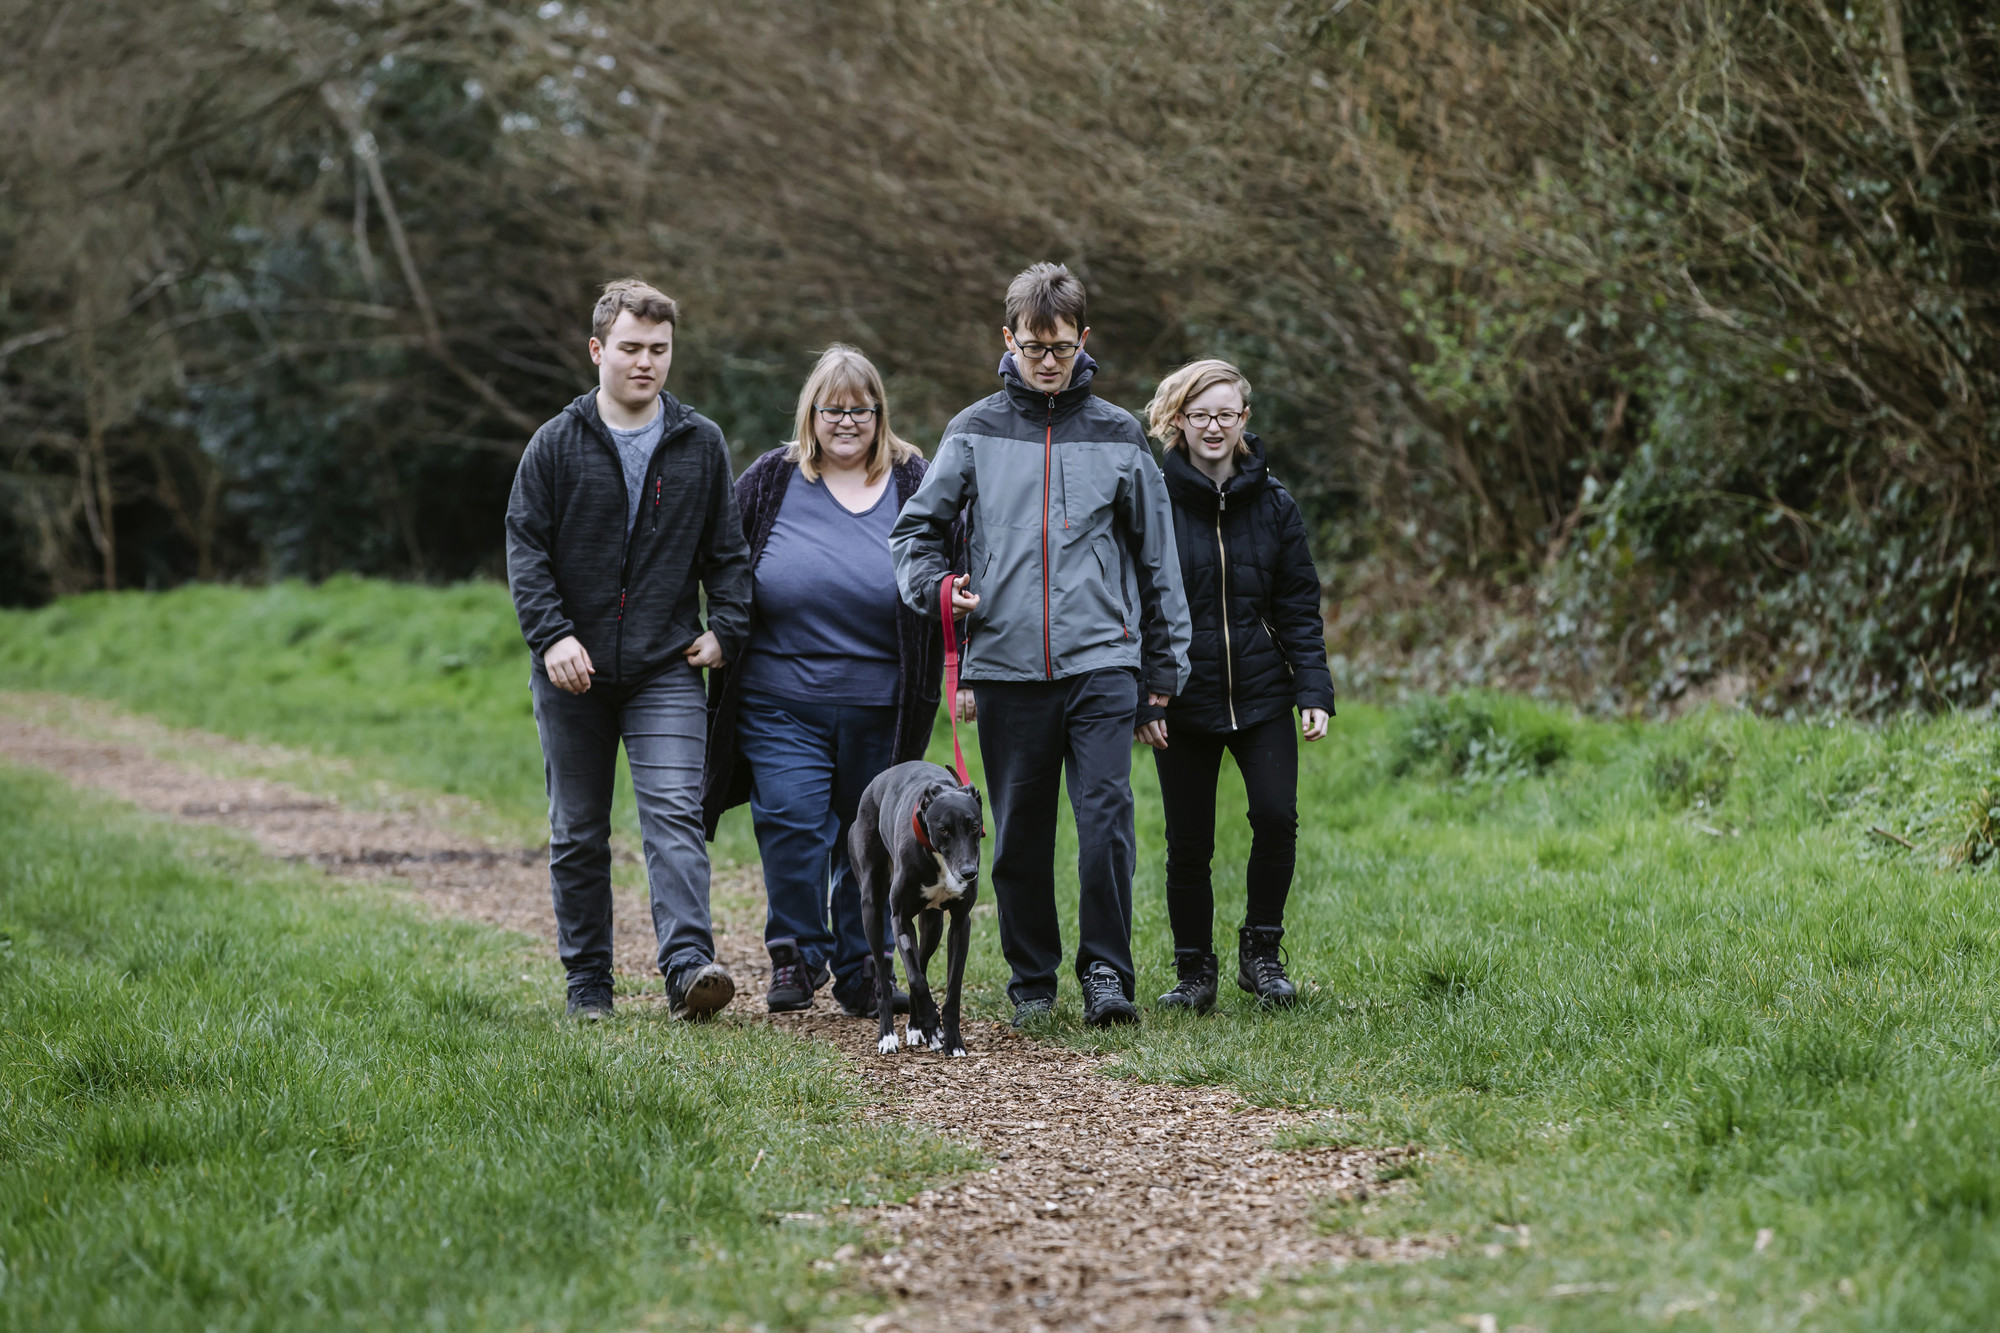 Lucie out on a walk with her new family